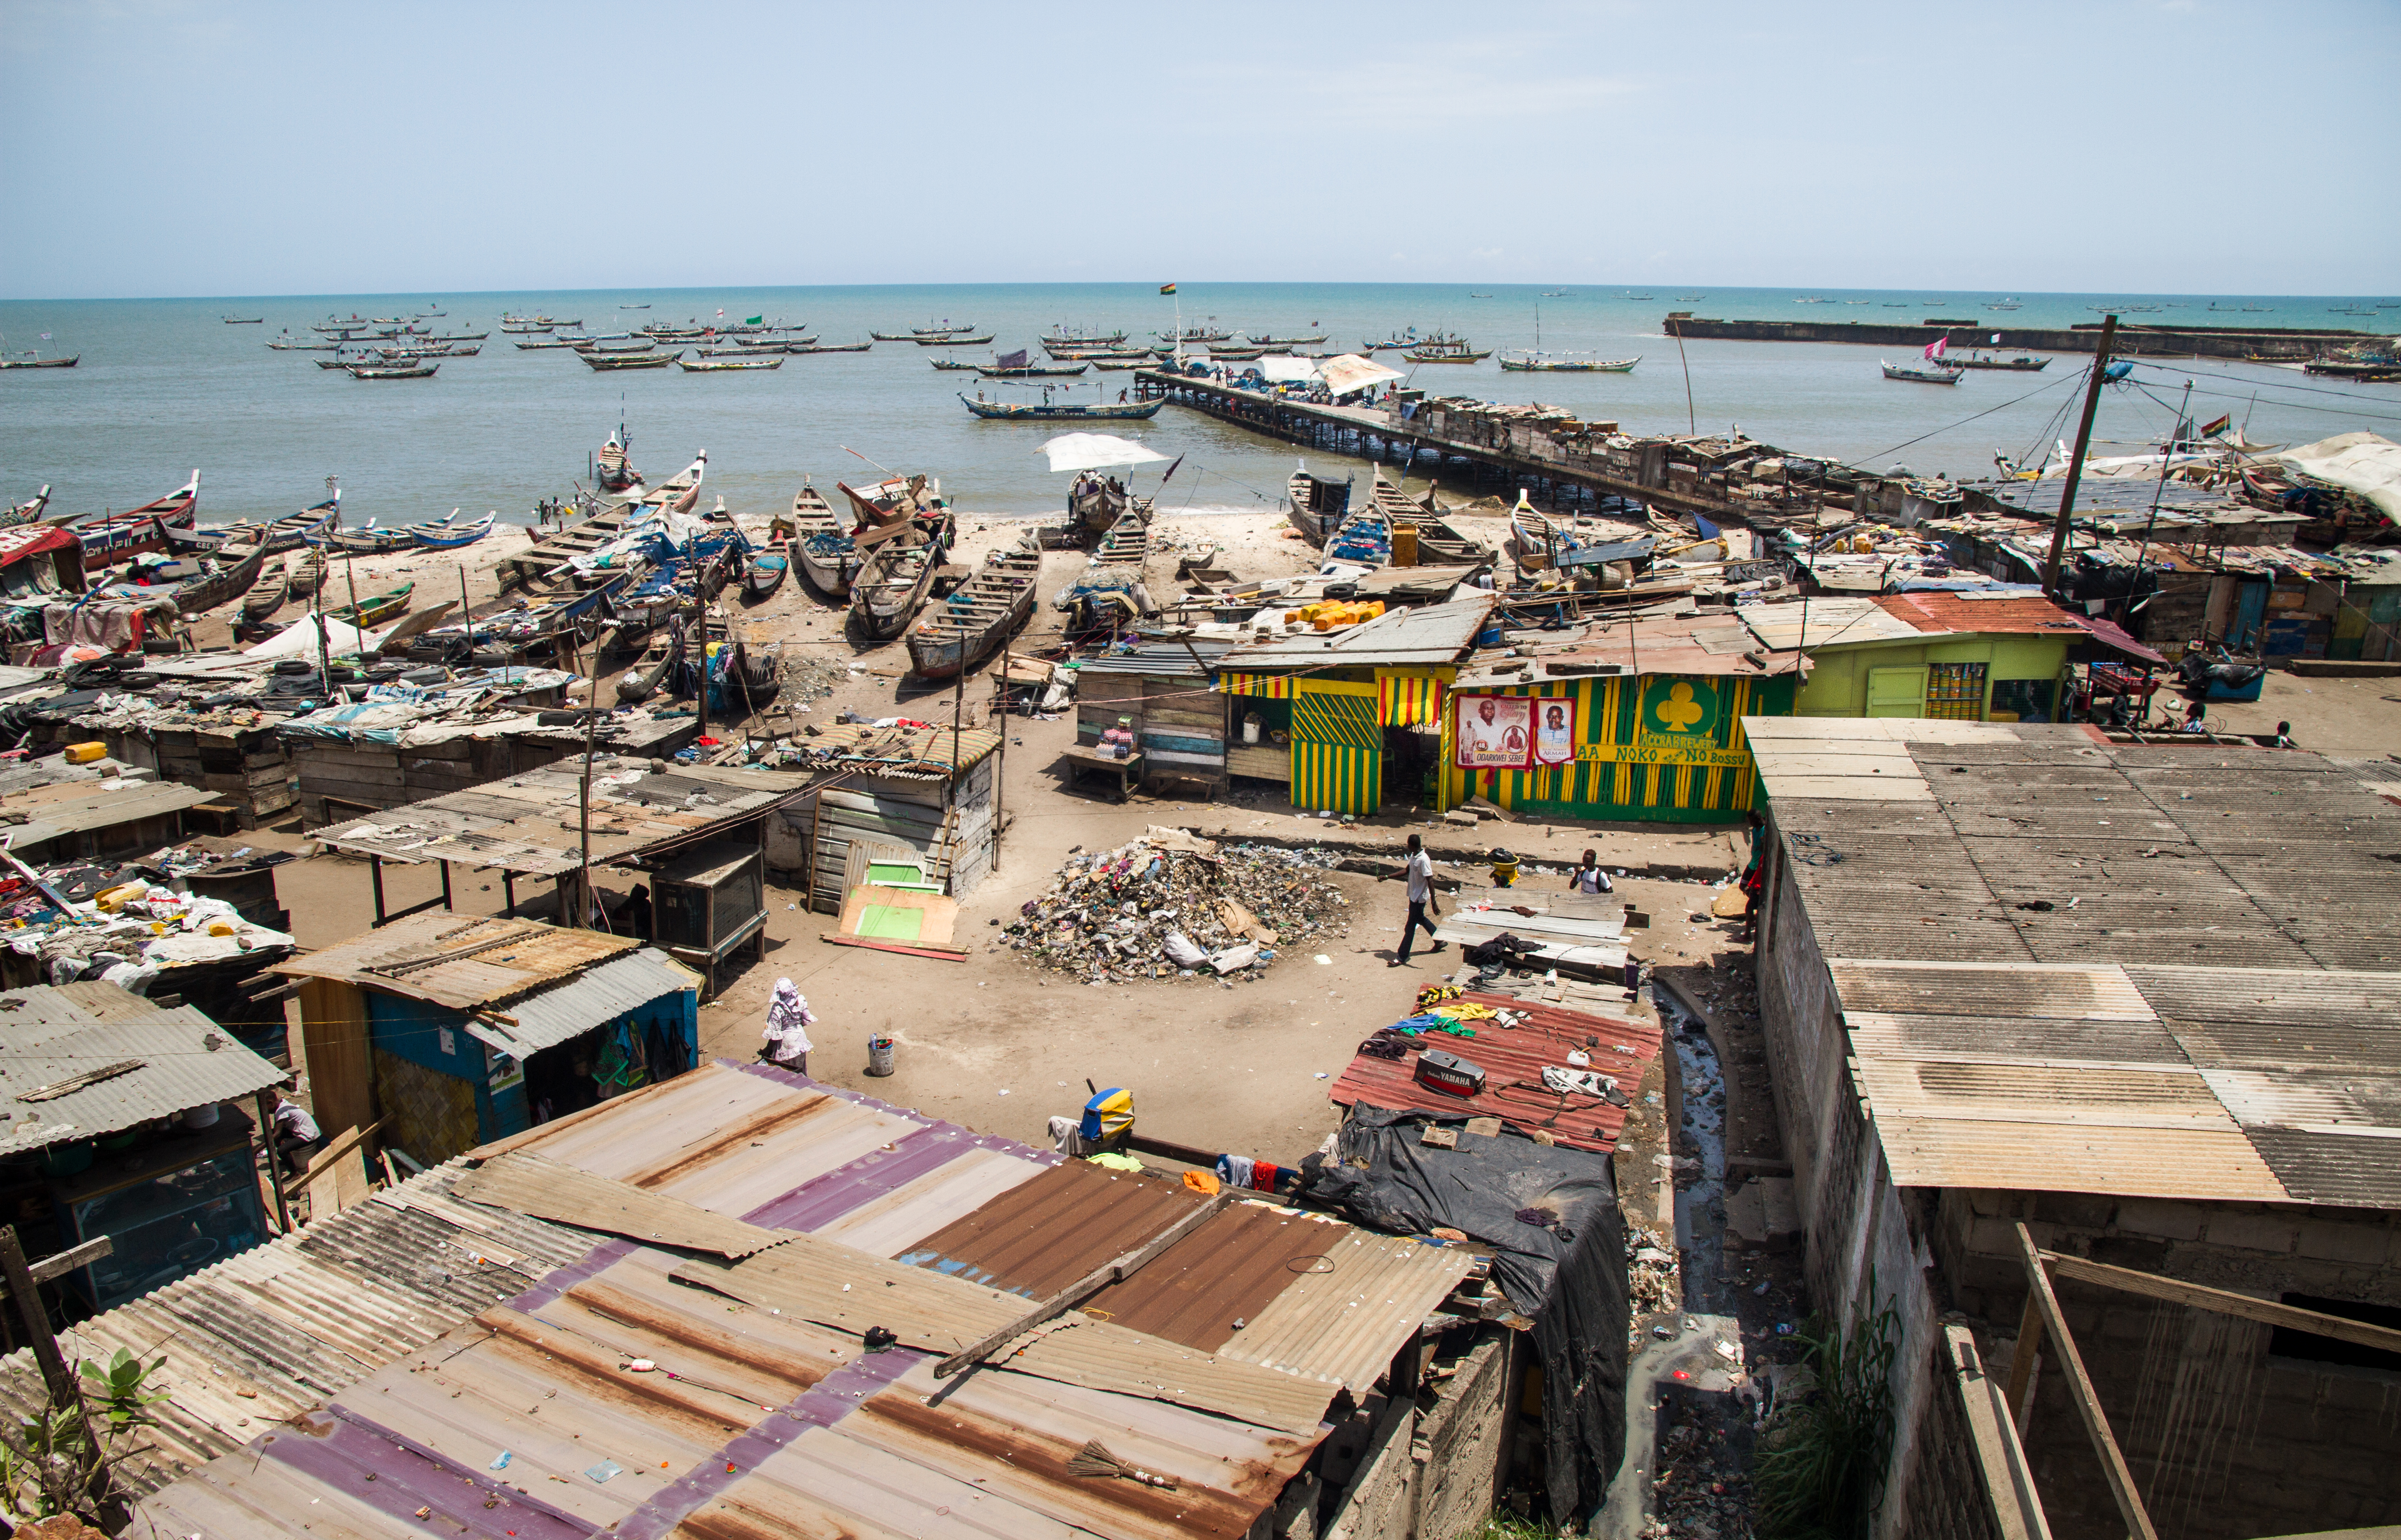 Old Accra, also known as Ga-Mashie, in Ghana's capital.